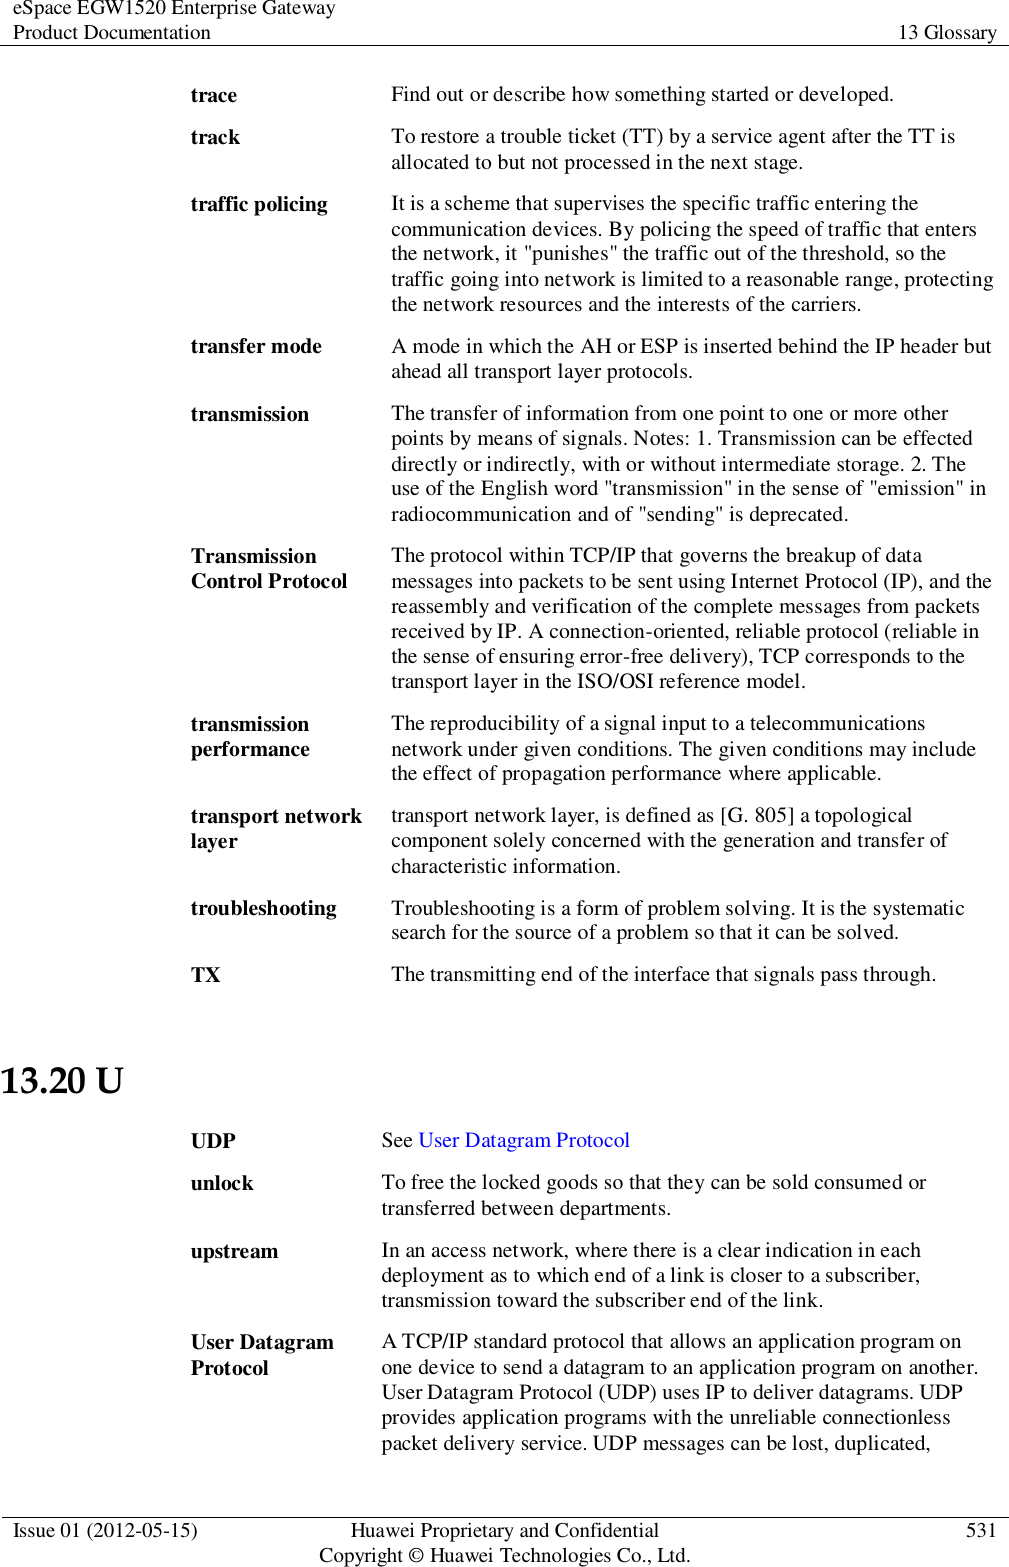 eSpace EGW1520 Enterprise Gateway Product Documentation 13 Glossary  Issue 01 (2012-05-15) Huawei Proprietary and Confidential                                     Copyright © Huawei Technologies Co., Ltd. 531  trace Find out or describe how something started or developed. track To restore a trouble ticket (TT) by a service agent after the TT is allocated to but not processed in the next stage. traffic policing It is a scheme that supervises the specific traffic entering the communication devices. By policing the speed of traffic that enters the network, it &quot;punishes&quot; the traffic out of the threshold, so the traffic going into network is limited to a reasonable range, protecting the network resources and the interests of the carriers. transfer mode A mode in which the AH or ESP is inserted behind the IP header but ahead all transport layer protocols. transmission The transfer of information from one point to one or more other points by means of signals. Notes: 1. Transmission can be effected directly or indirectly, with or without intermediate storage. 2. The use of the English word &quot;transmission&quot; in the sense of &quot;emission&quot; in radiocommunication and of &quot;sending&quot; is deprecated. Transmission Control Protocol The protocol within TCP/IP that governs the breakup of data messages into packets to be sent using Internet Protocol (IP), and the reassembly and verification of the complete messages from packets received by IP. A connection-oriented, reliable protocol (reliable in the sense of ensuring error-free delivery), TCP corresponds to the transport layer in the ISO/OSI reference model. transmission performance The reproducibility of a signal input to a telecommunications network under given conditions. The given conditions may include the effect of propagation performance where applicable. transport network layer transport network layer, is defined as [G. 805] a topological component solely concerned with the generation and transfer of characteristic information. troubleshooting Troubleshooting is a form of problem solving. It is the systematic search for the source of a problem so that it can be solved. TX The transmitting end of the interface that signals pass through. 13.20 U UDP See User Datagram Protocol unlock To free the locked goods so that they can be sold consumed or transferred between departments. upstream In an access network, where there is a clear indication in each deployment as to which end of a link is closer to a subscriber, transmission toward the subscriber end of the link. User Datagram Protocol A TCP/IP standard protocol that allows an application program on one device to send a datagram to an application program on another. User Datagram Protocol (UDP) uses IP to deliver datagrams. UDP provides application programs with the unreliable connectionless packet delivery service. UDP messages can be lost, duplicated, 